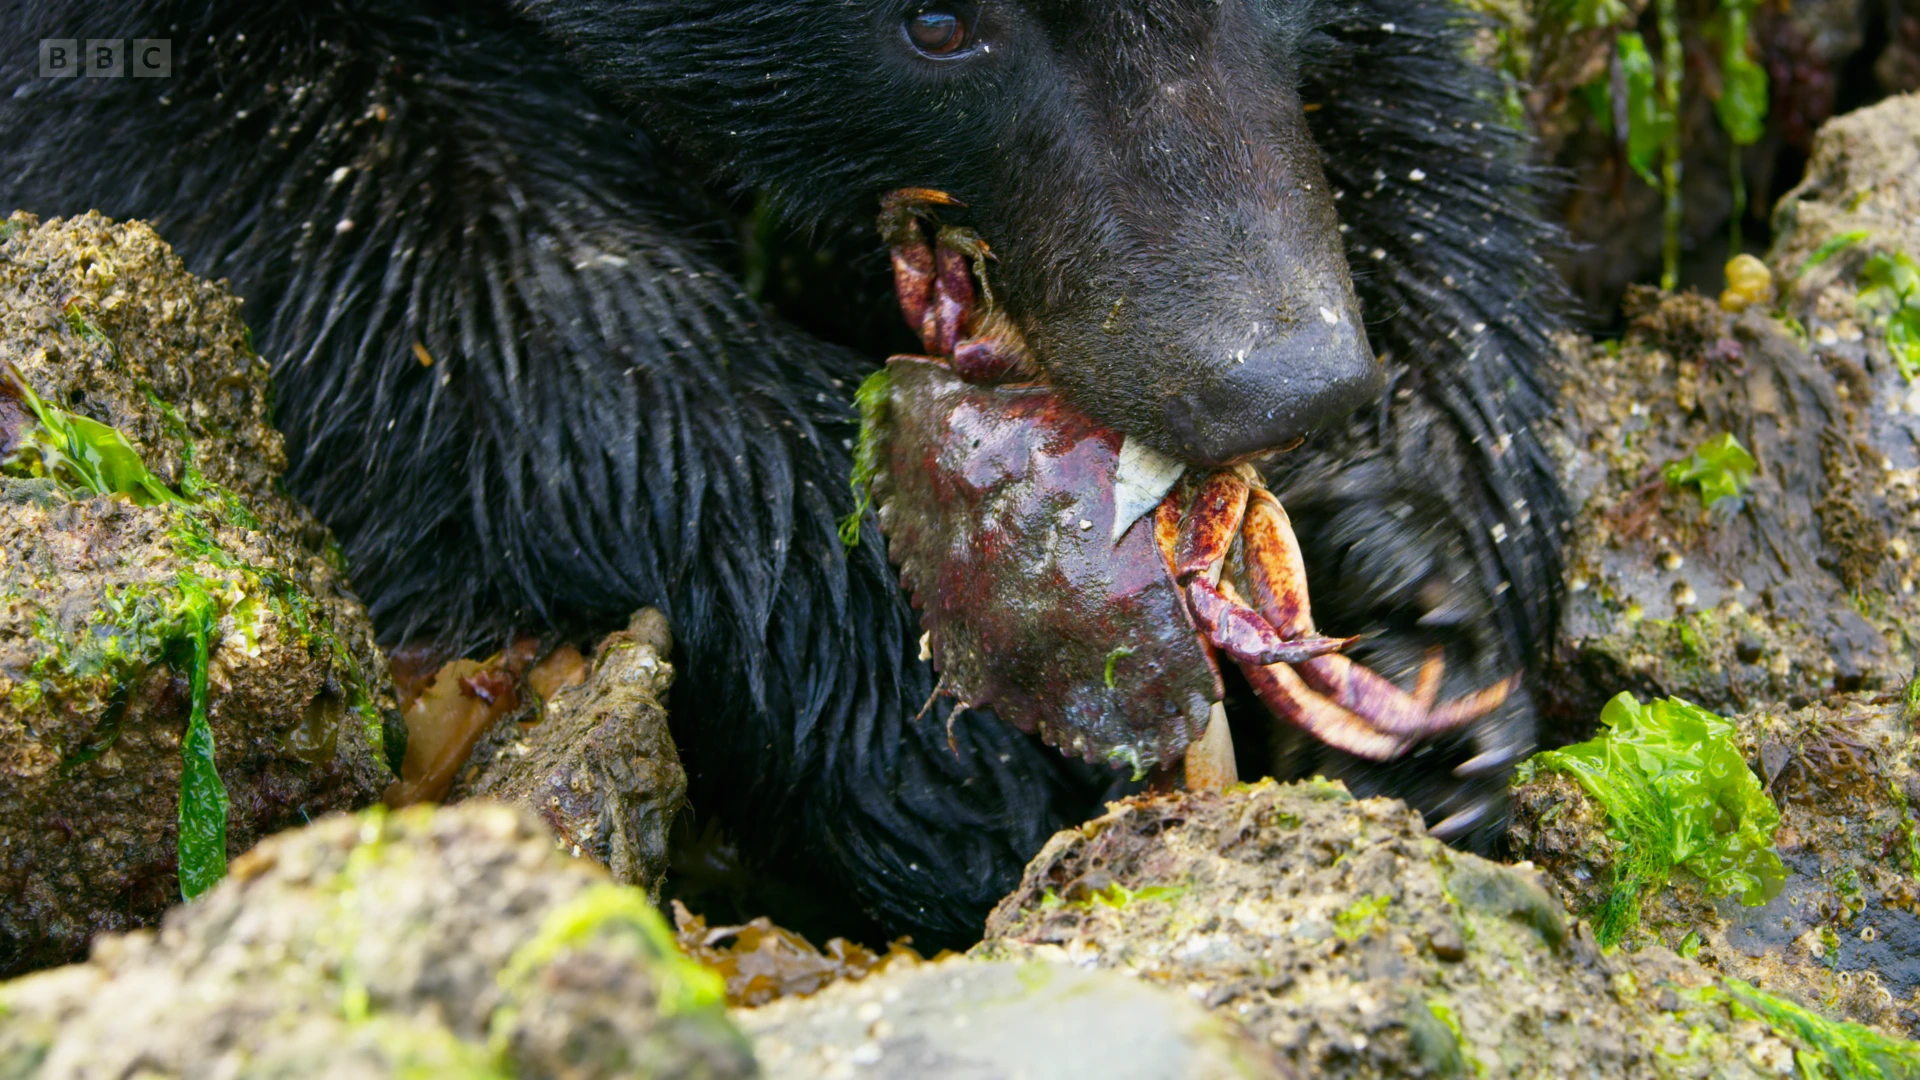 Vancouver Island black bear (Ursus americanus vancouveri) as shown in Seven Worlds, One Planet - North America